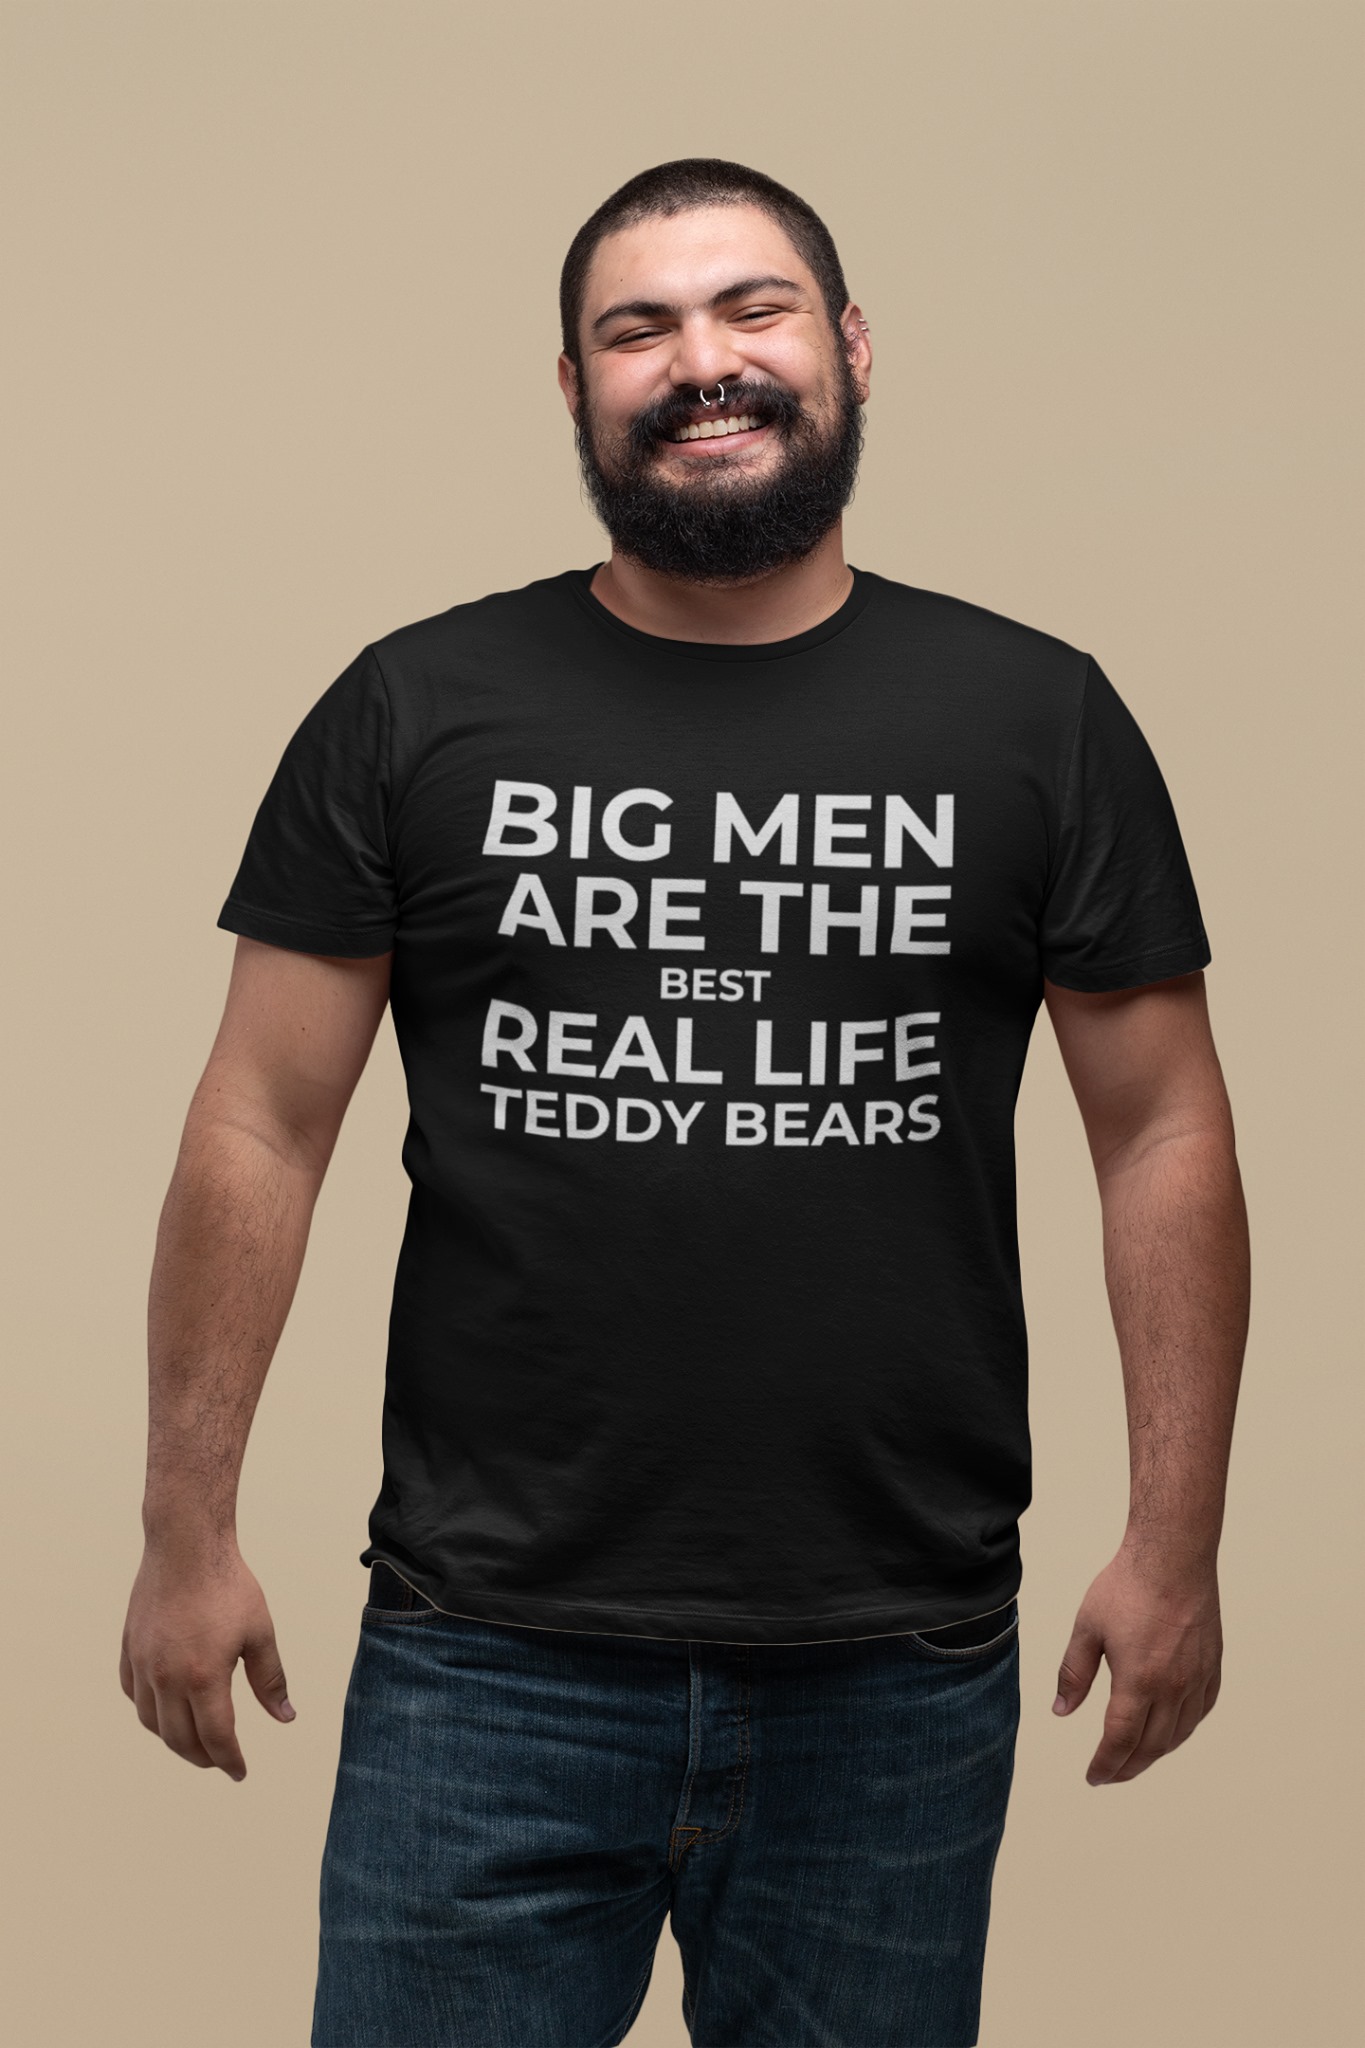 Big men are the best real life - Teddy bears